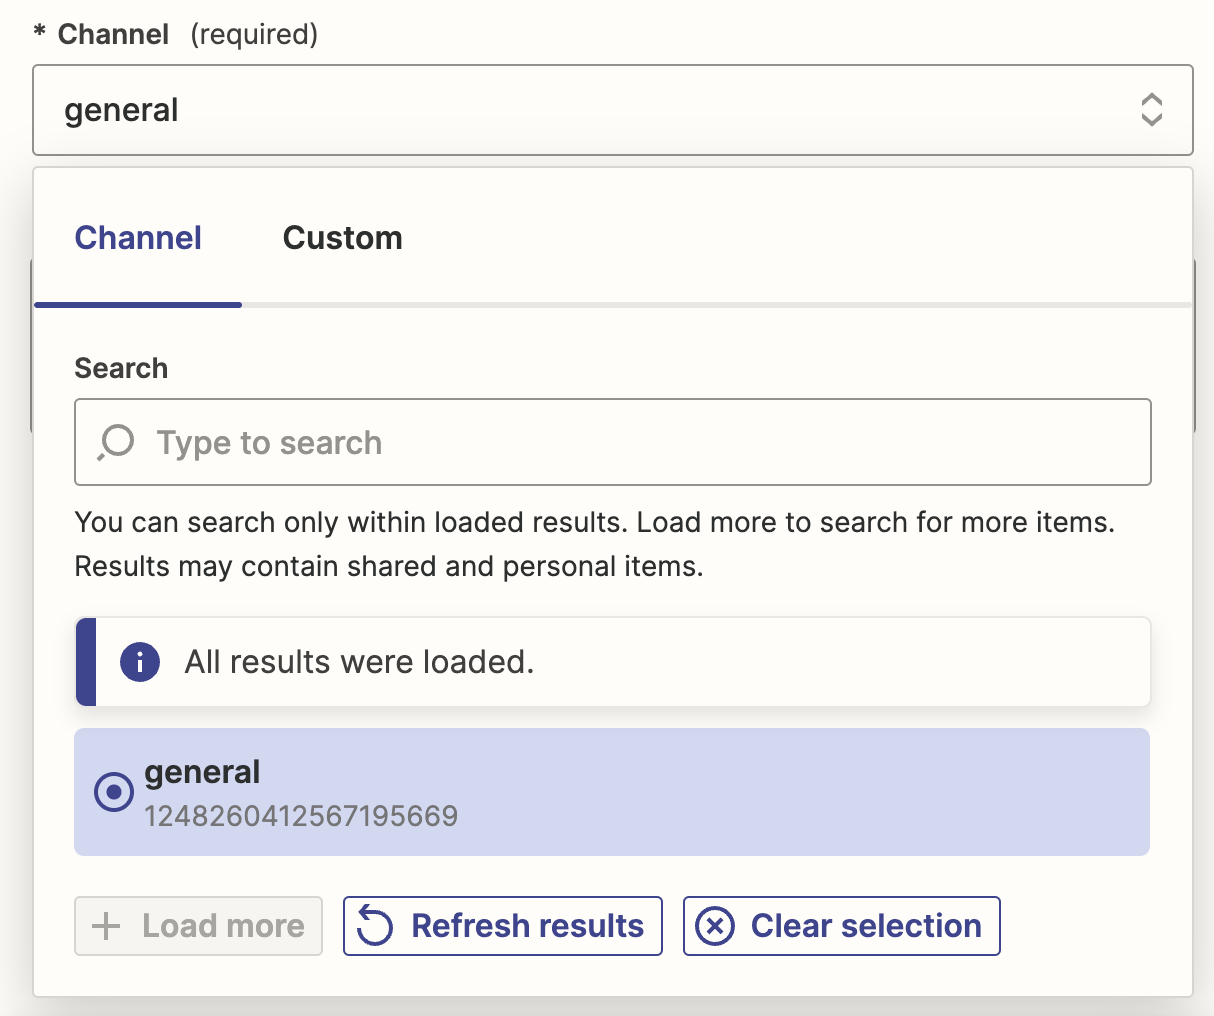 The Channel field is shown open in the Zap editor with the General channel selected in the dropdown.